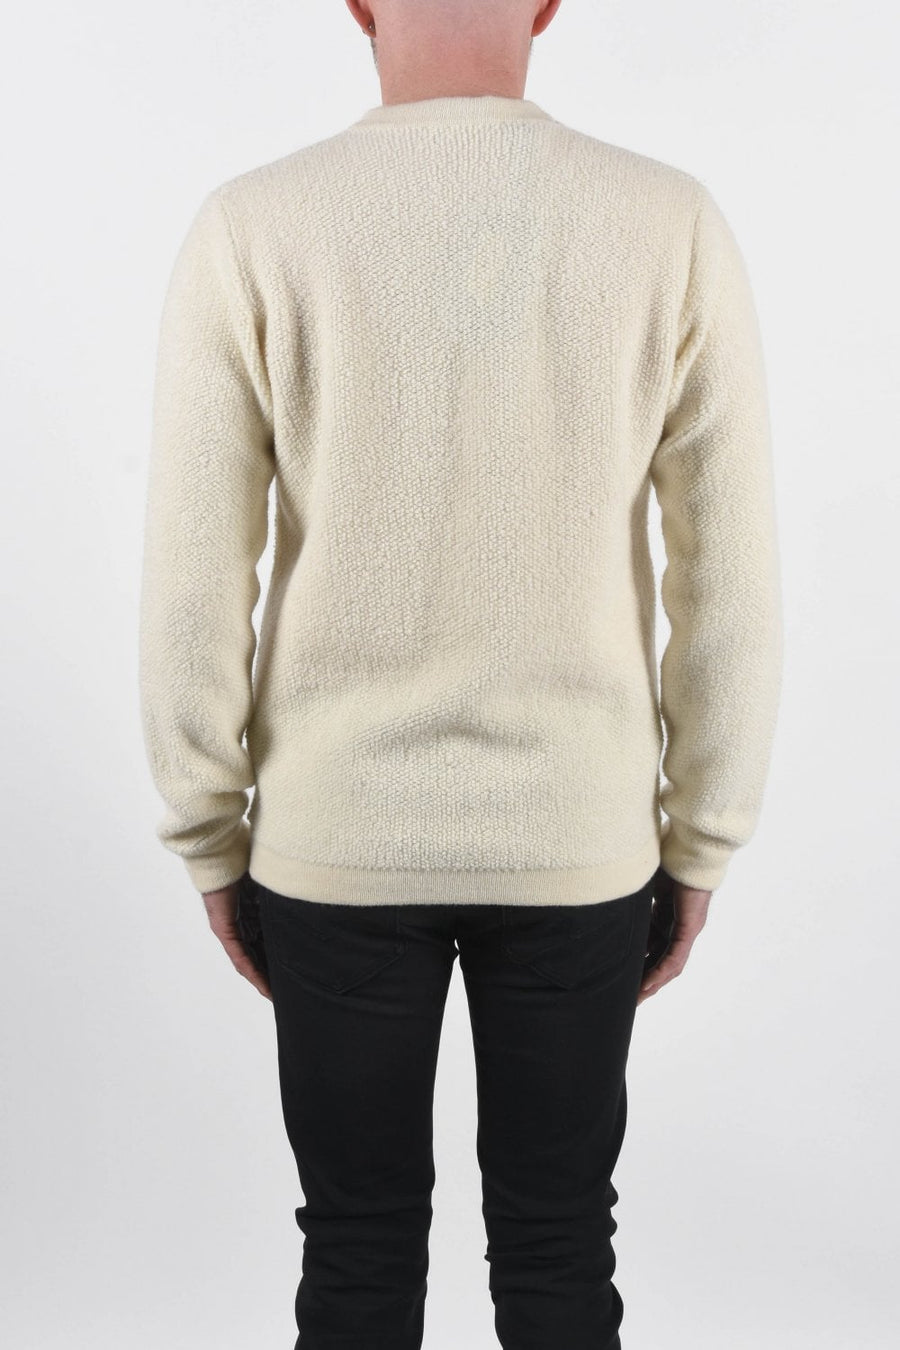 Buy the Daniele Fiesoli Textured Round Neck Knit Cream at Intro. Spend £50 for free UK delivery. Official stockists. We ship worldwide.